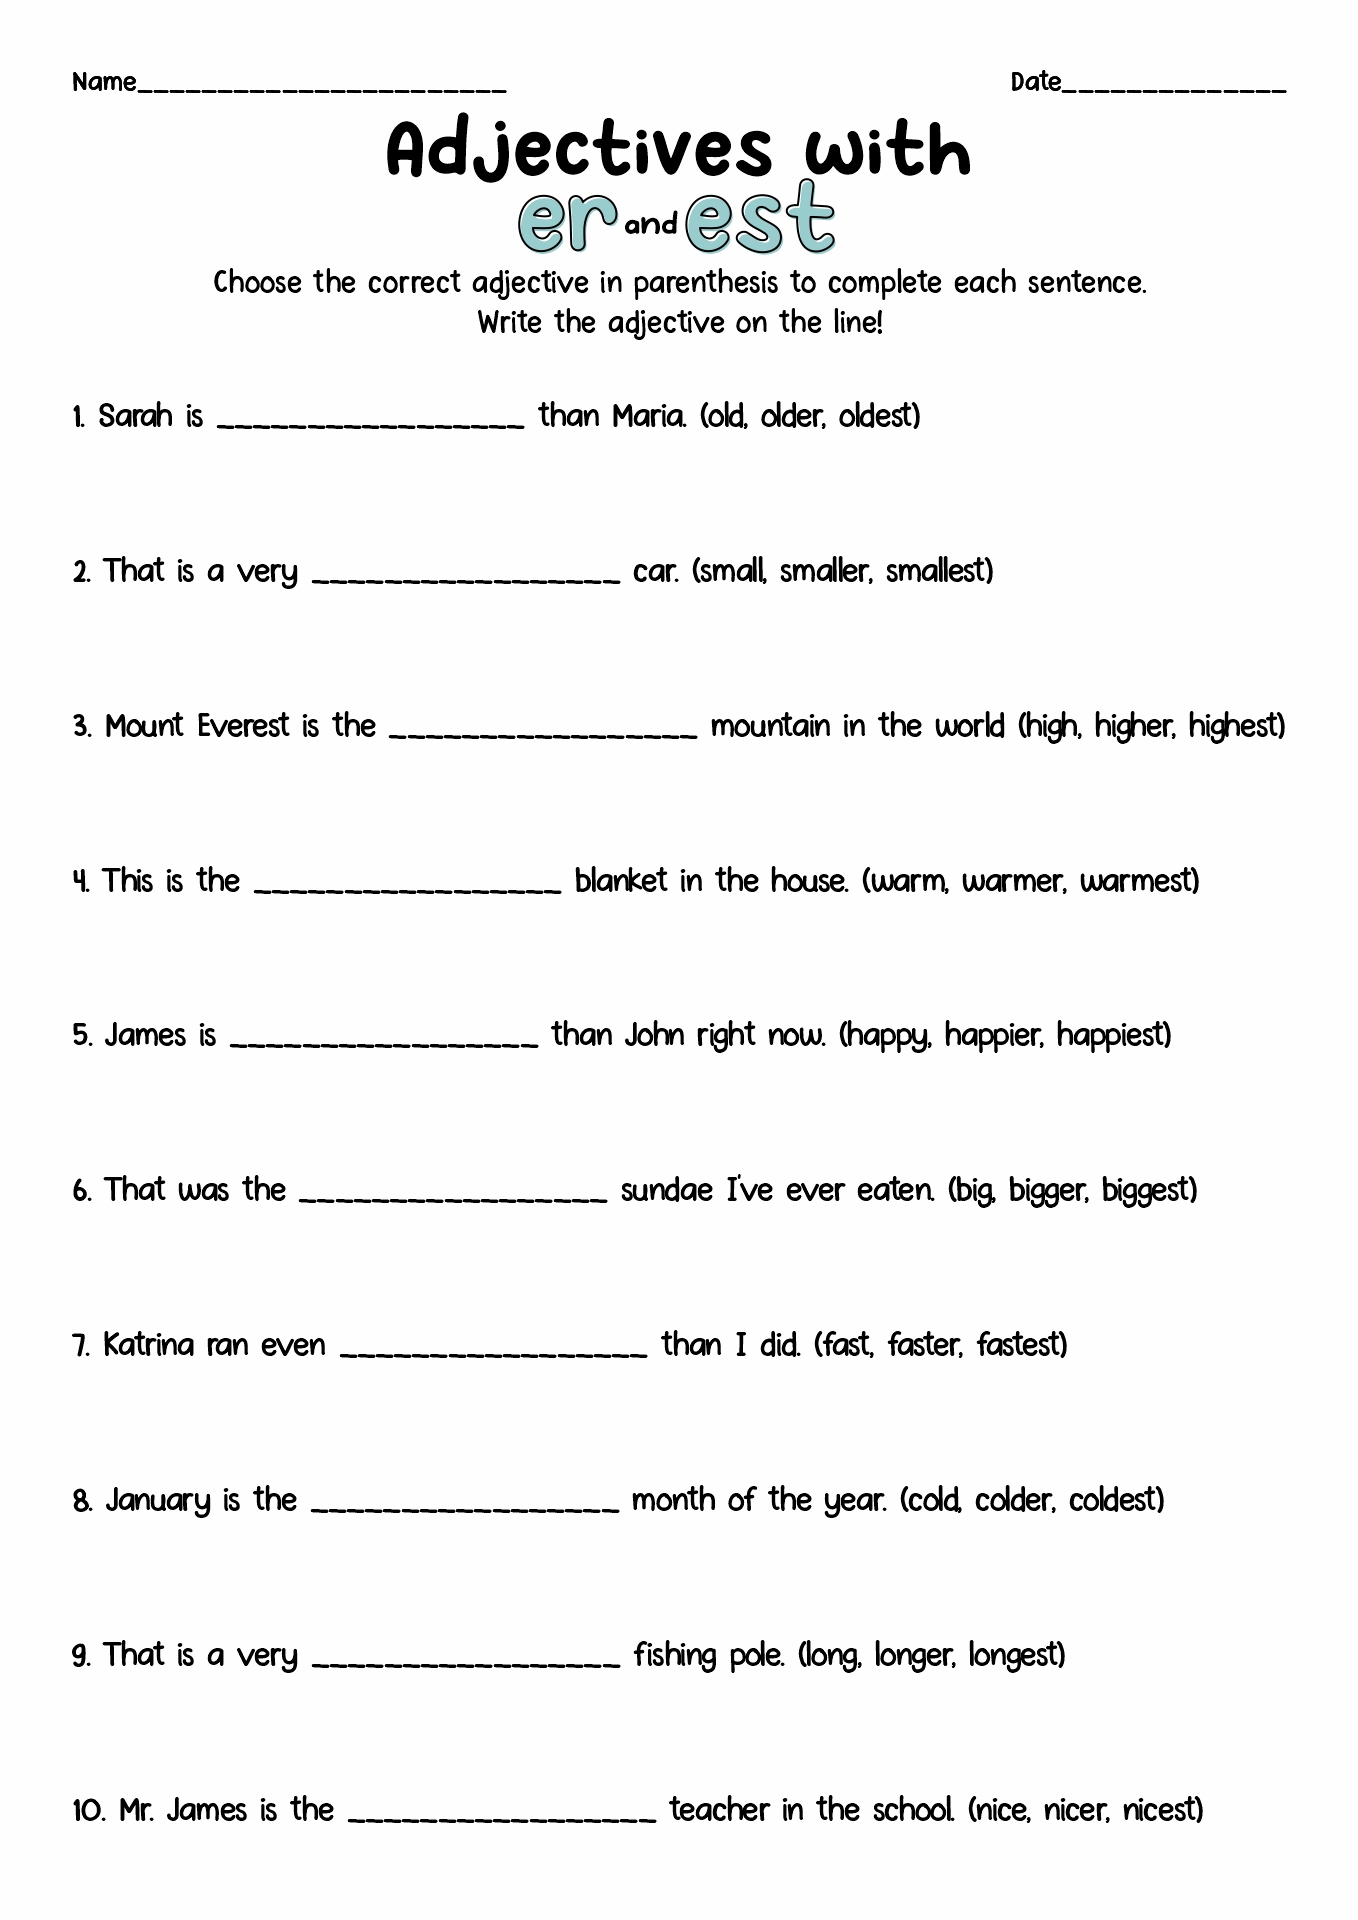 14 Best Images Of Number Cut Out Worksheet Free Preschool Cut And Paste Worksheets Cut And